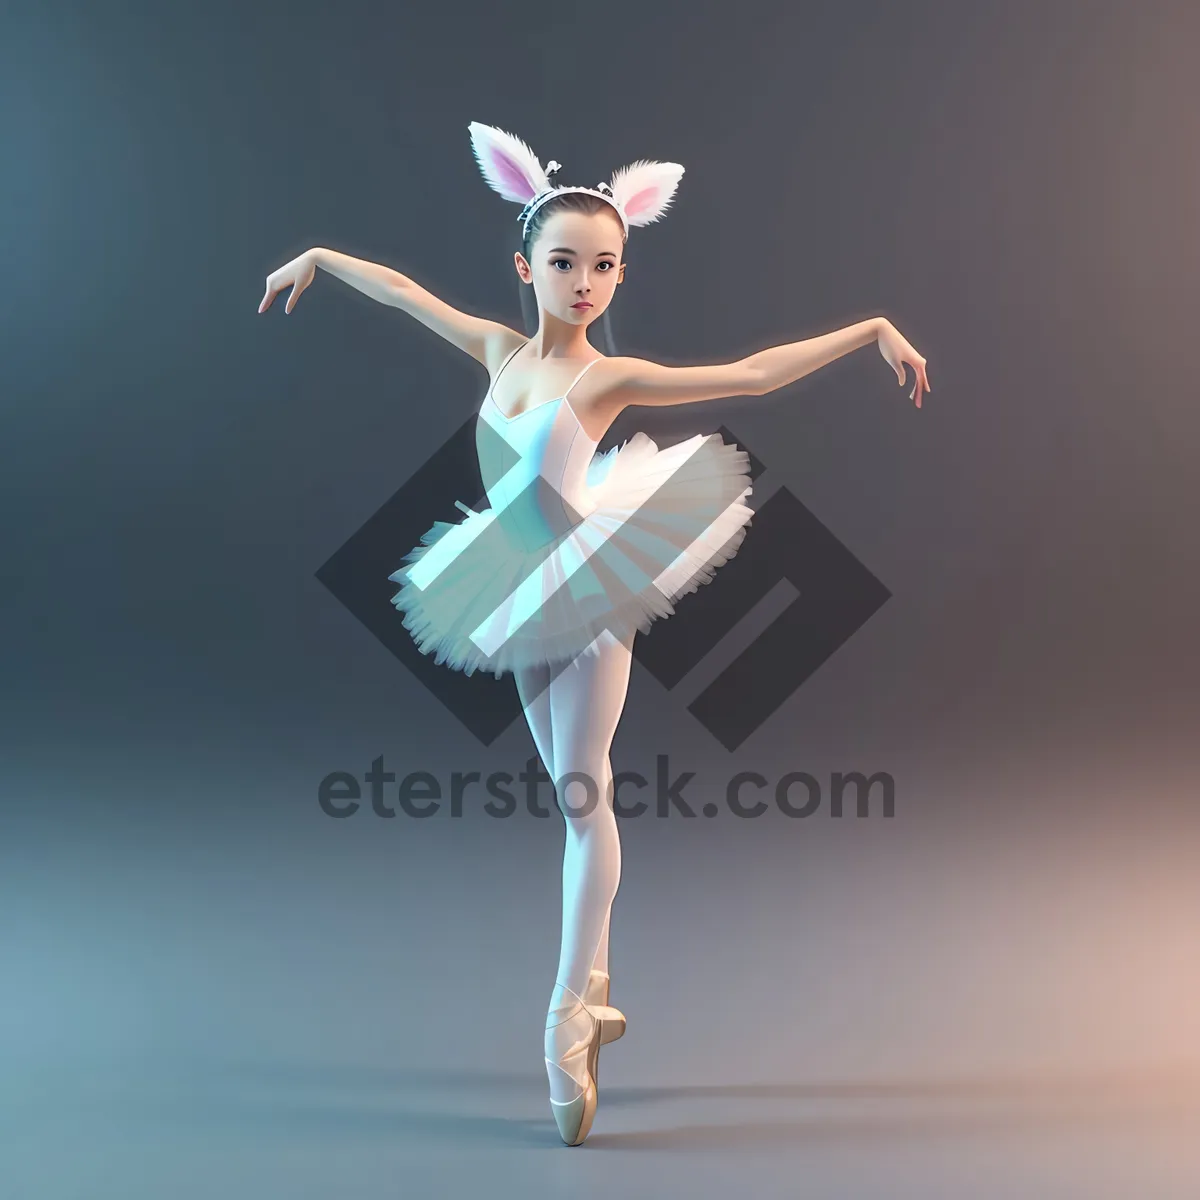 Picture of Dynamic Ballerina in Elegant Jumping Pose